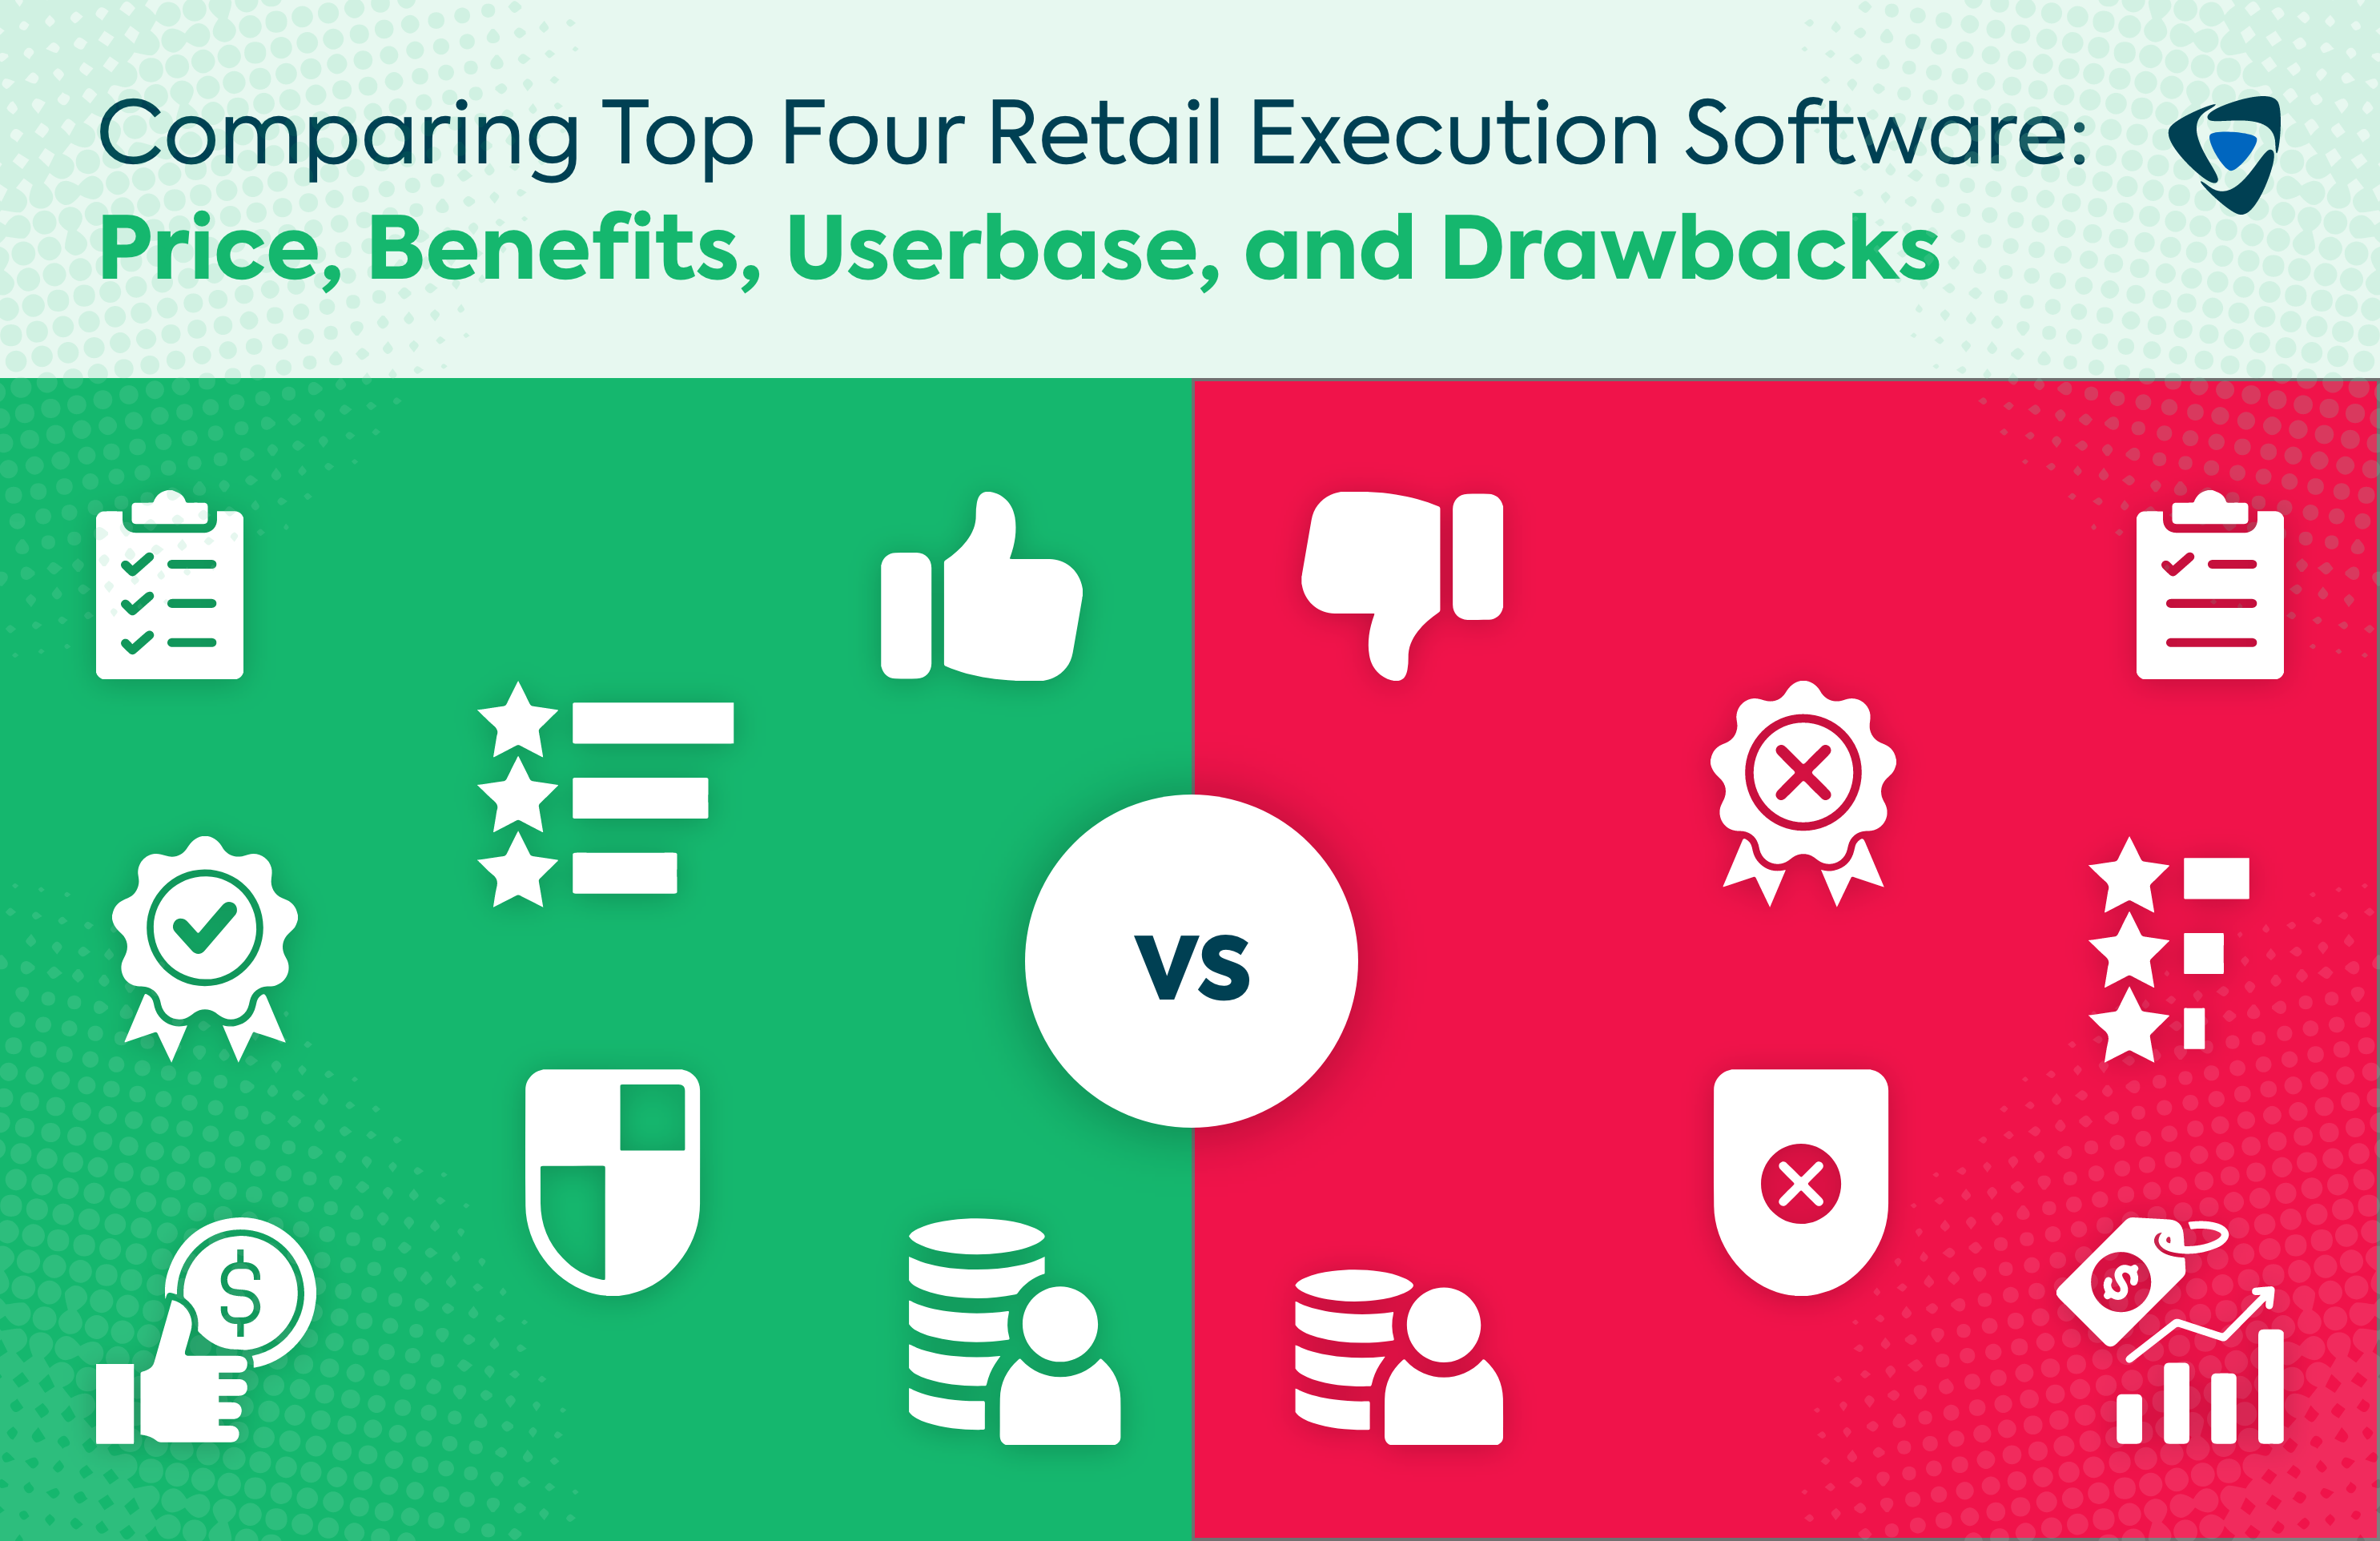 Comparing Top Five Retail Execution Software: Price, Benefits, Userbase, and Drawbacks